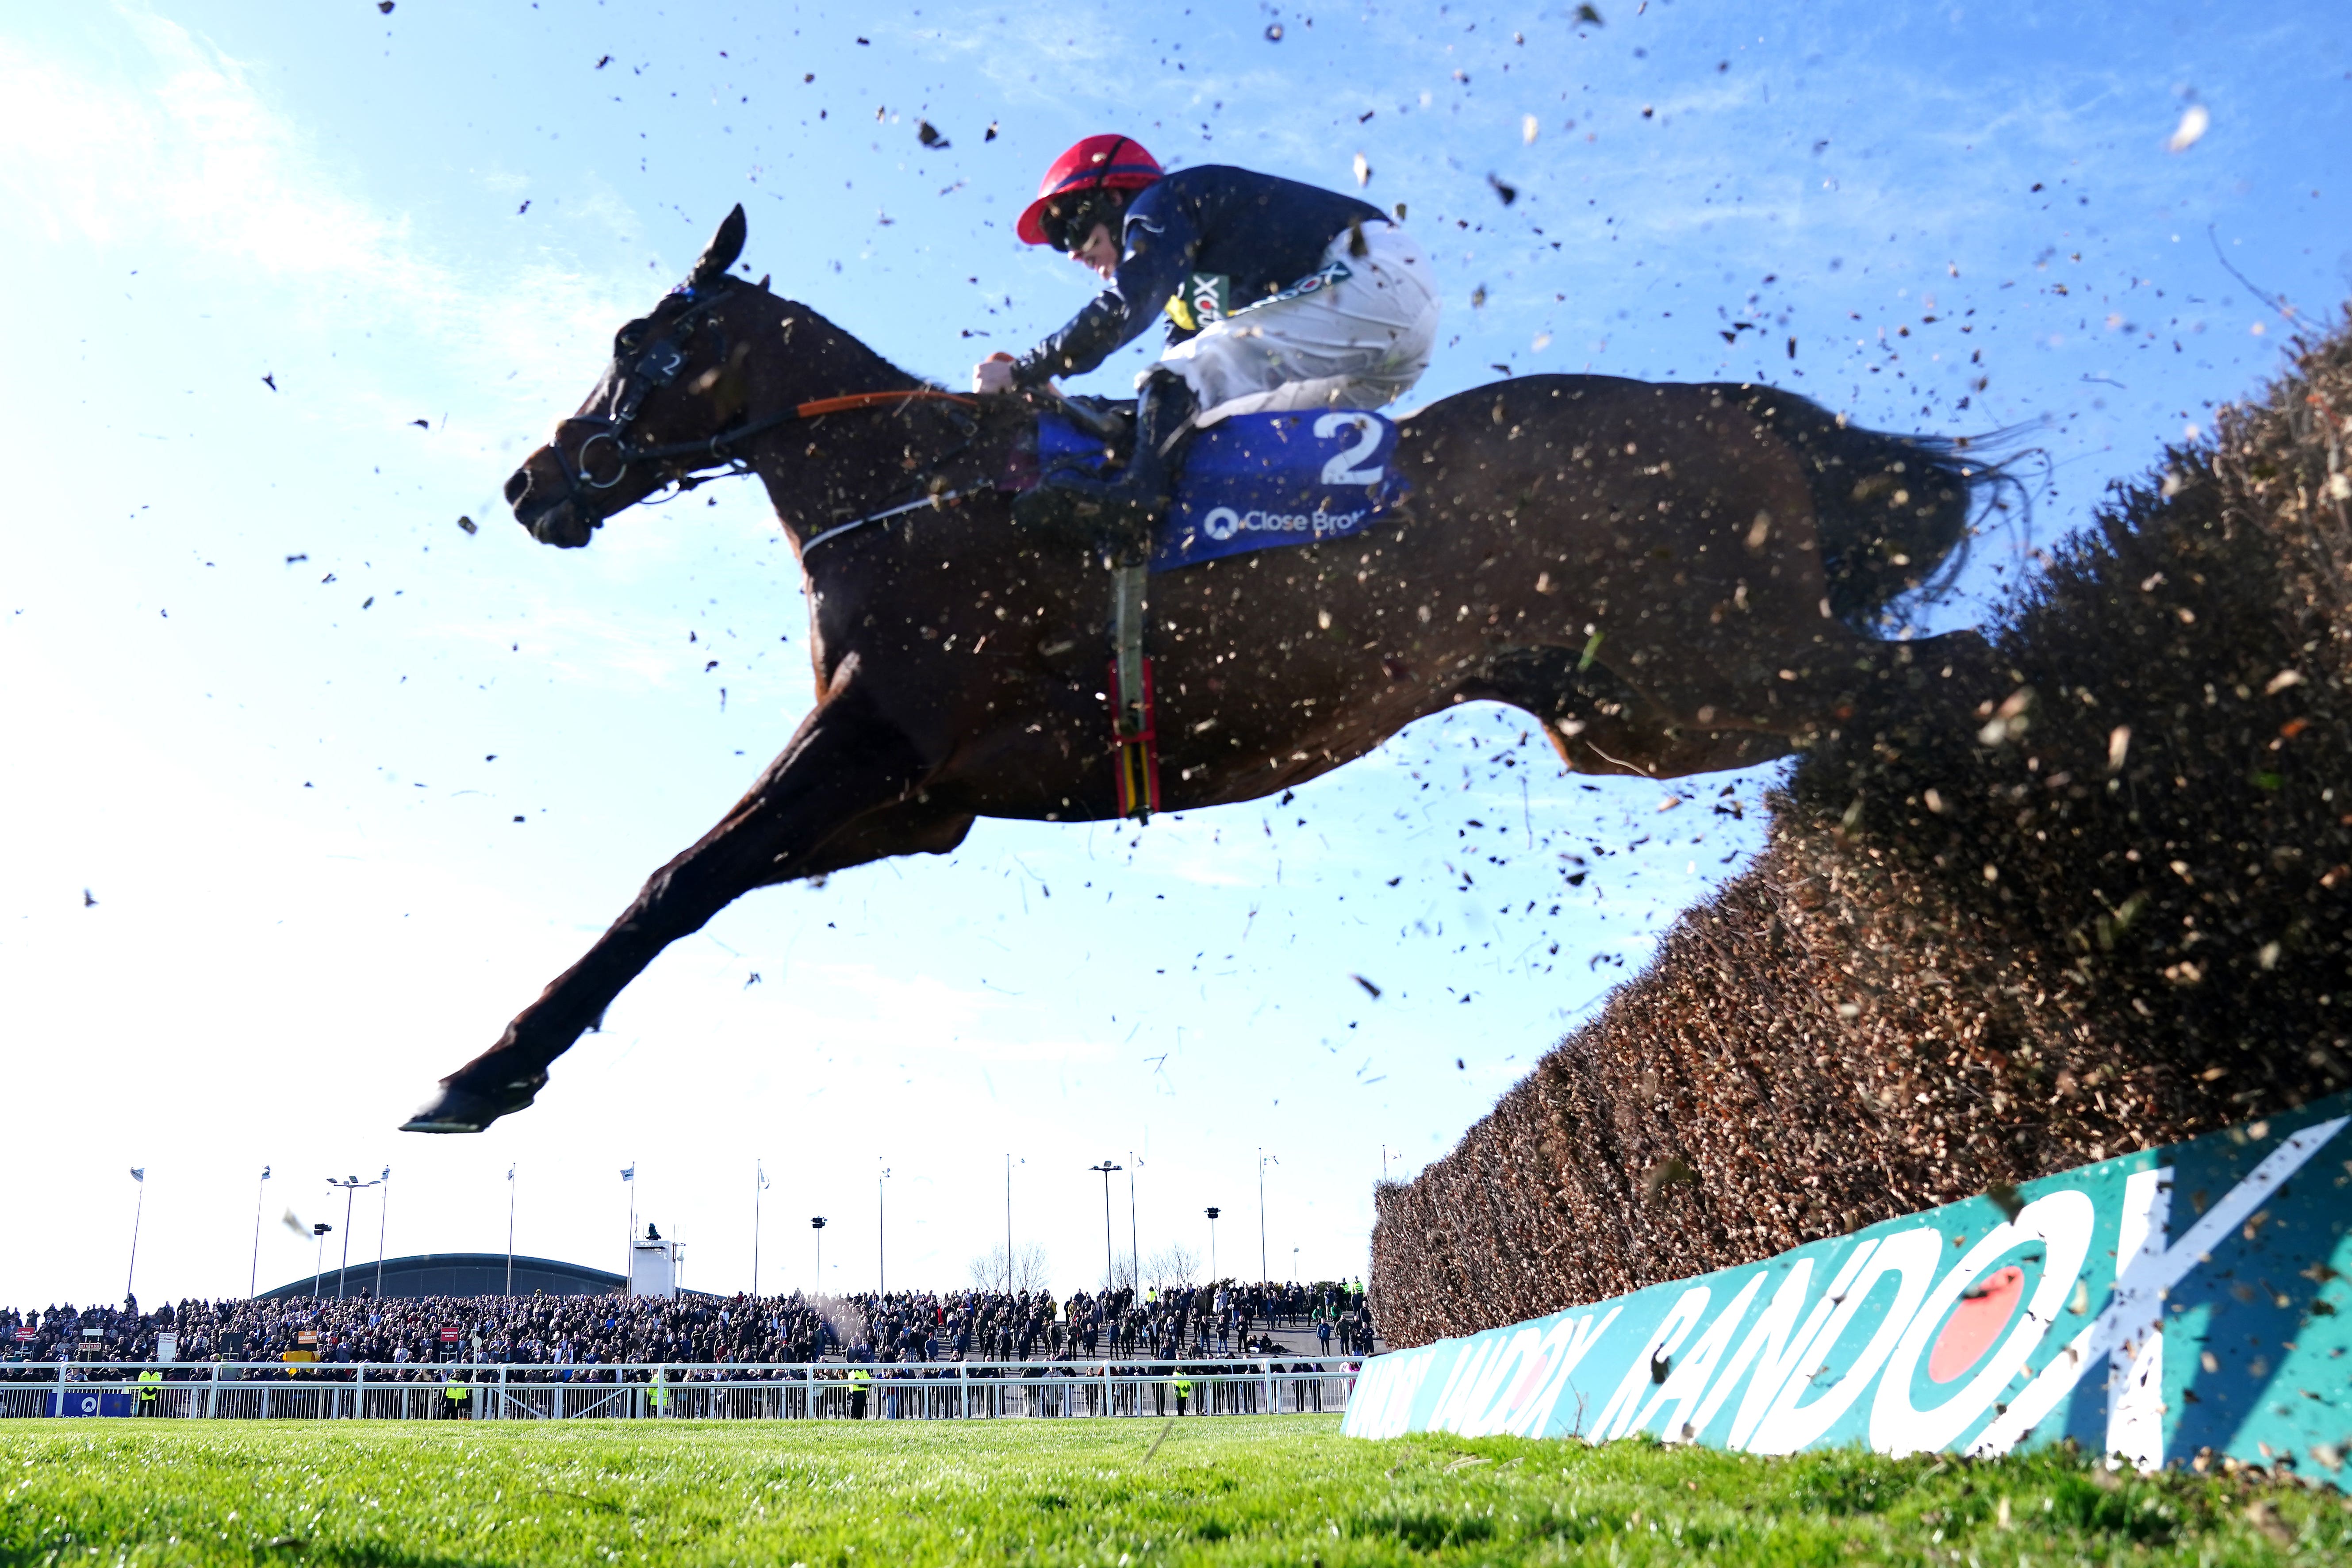 Activists have said they plan to disrupt the Grand National but will not be enter the track if there are horses and jockeys riding (David Davies/Jockey Club/PA)